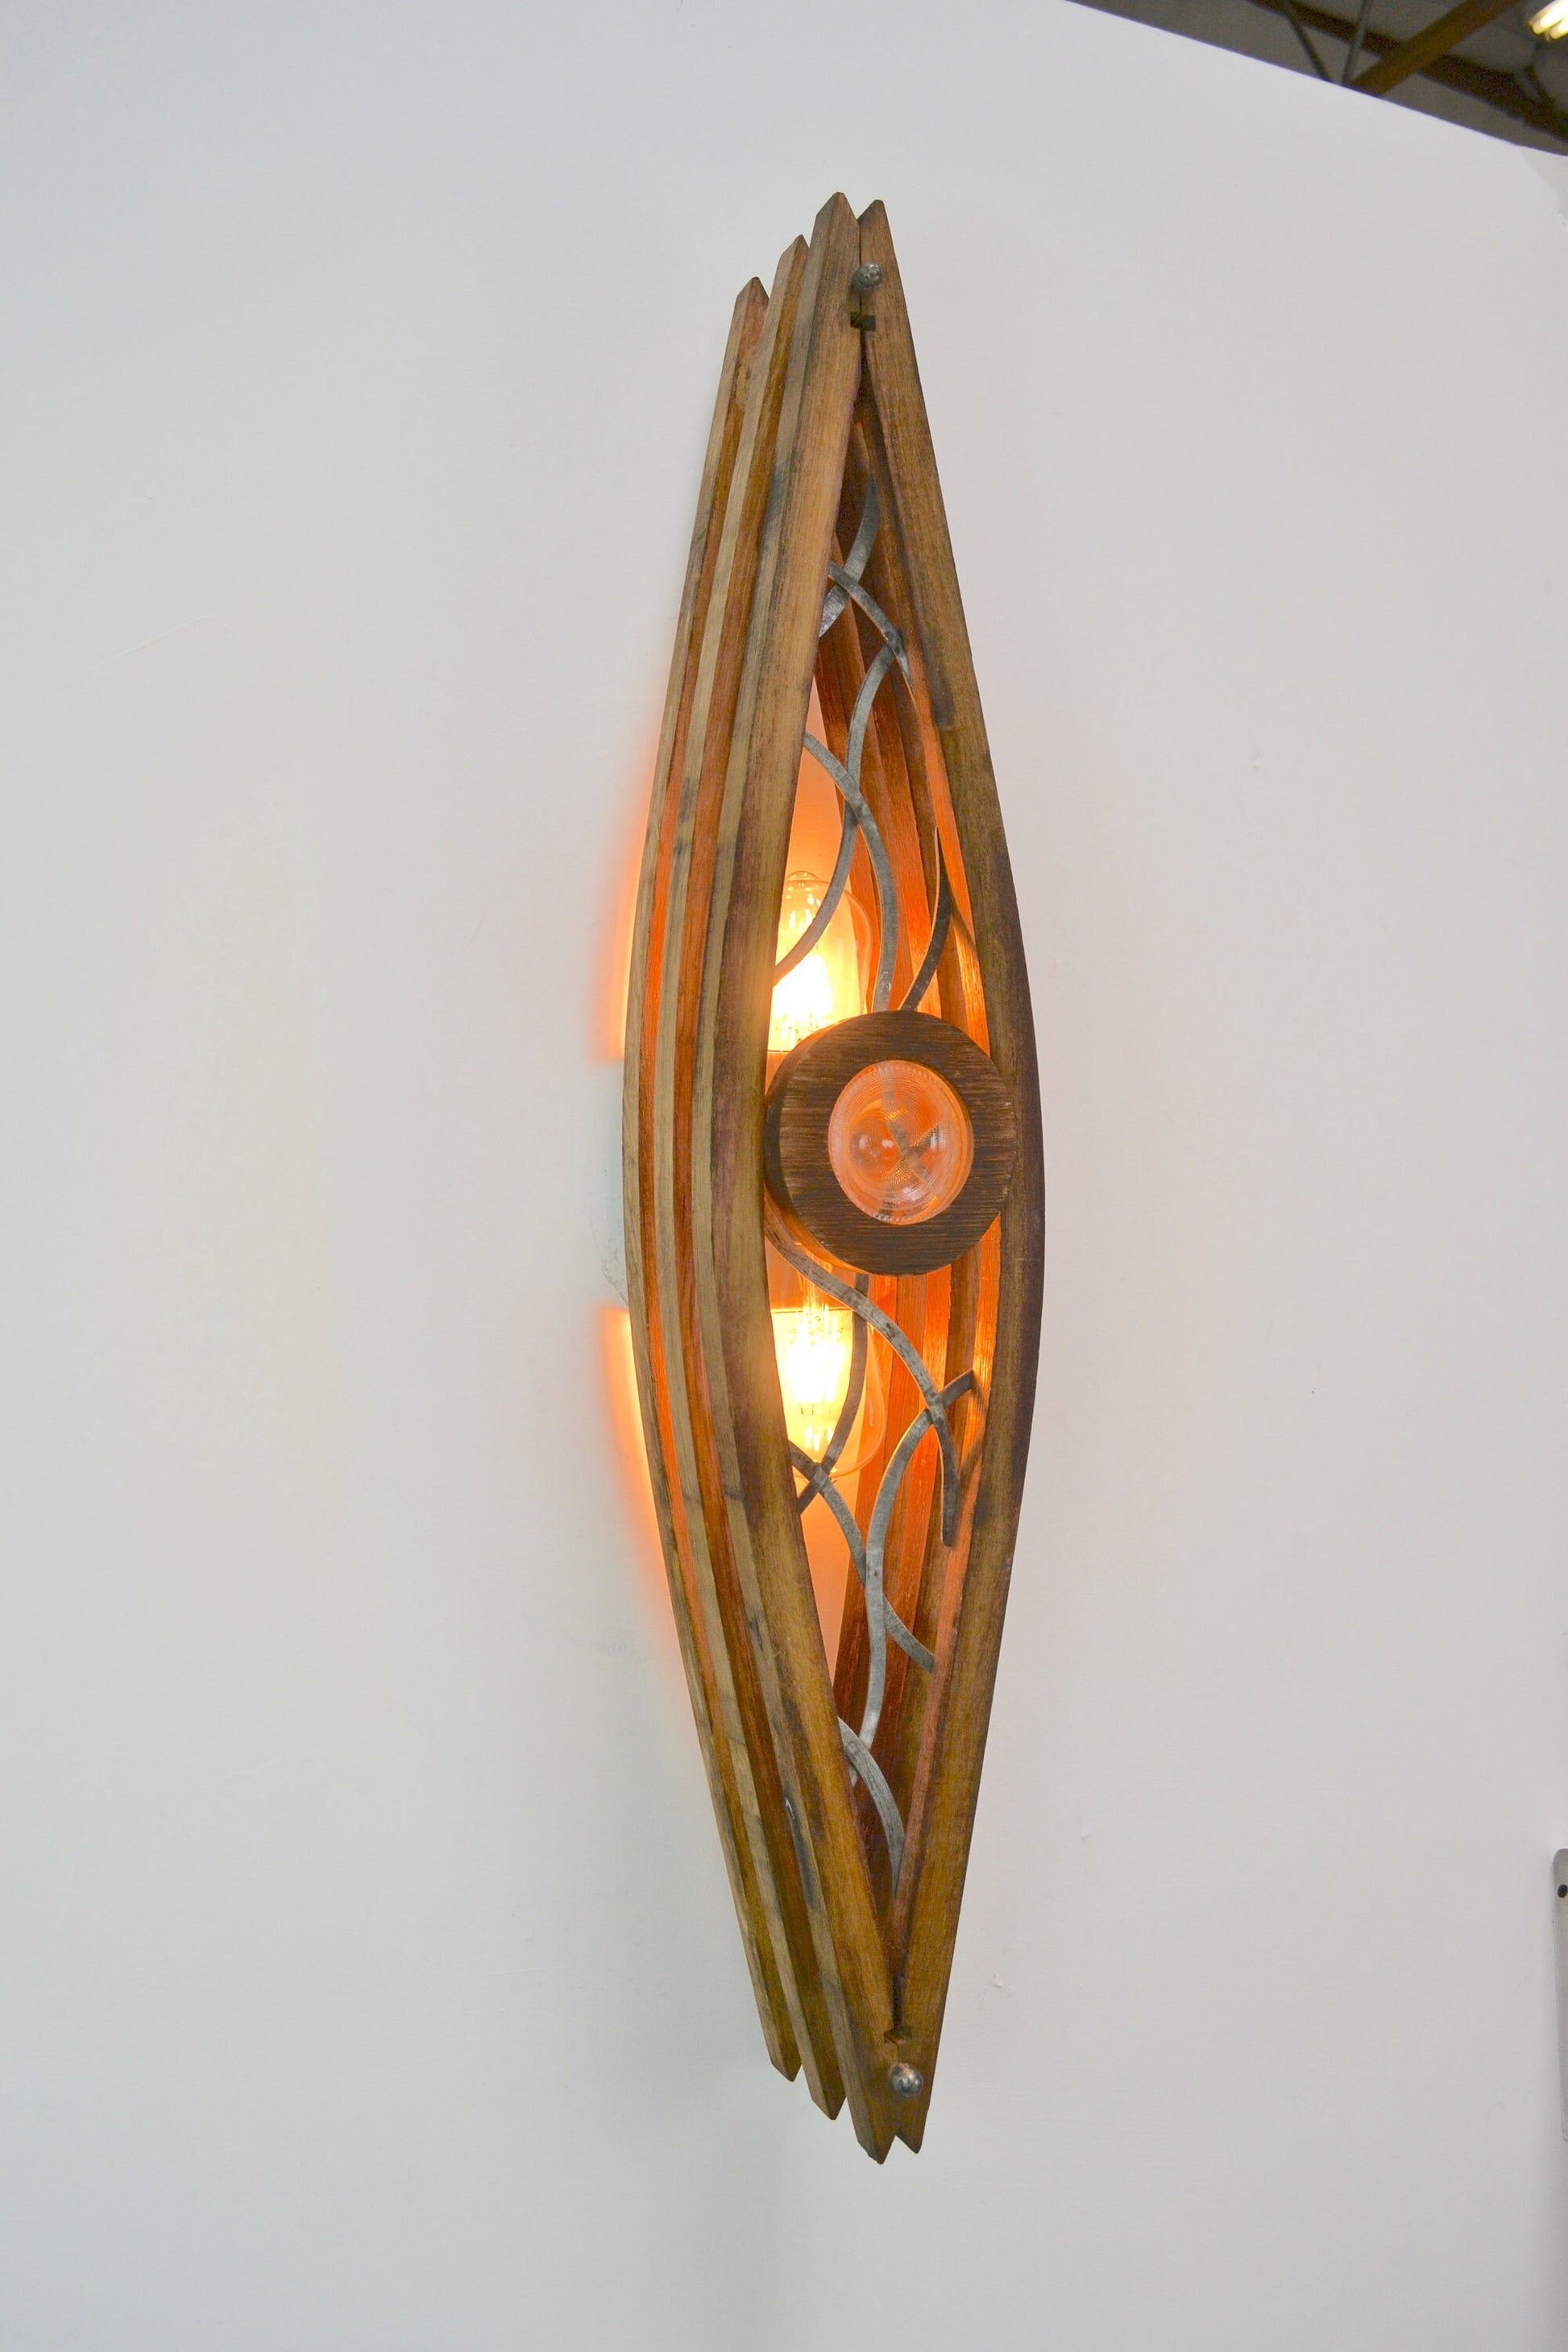 Wine Barrel Wall Sconce - Pestana - Made from Retired California wine barrels. 100% Recycled!